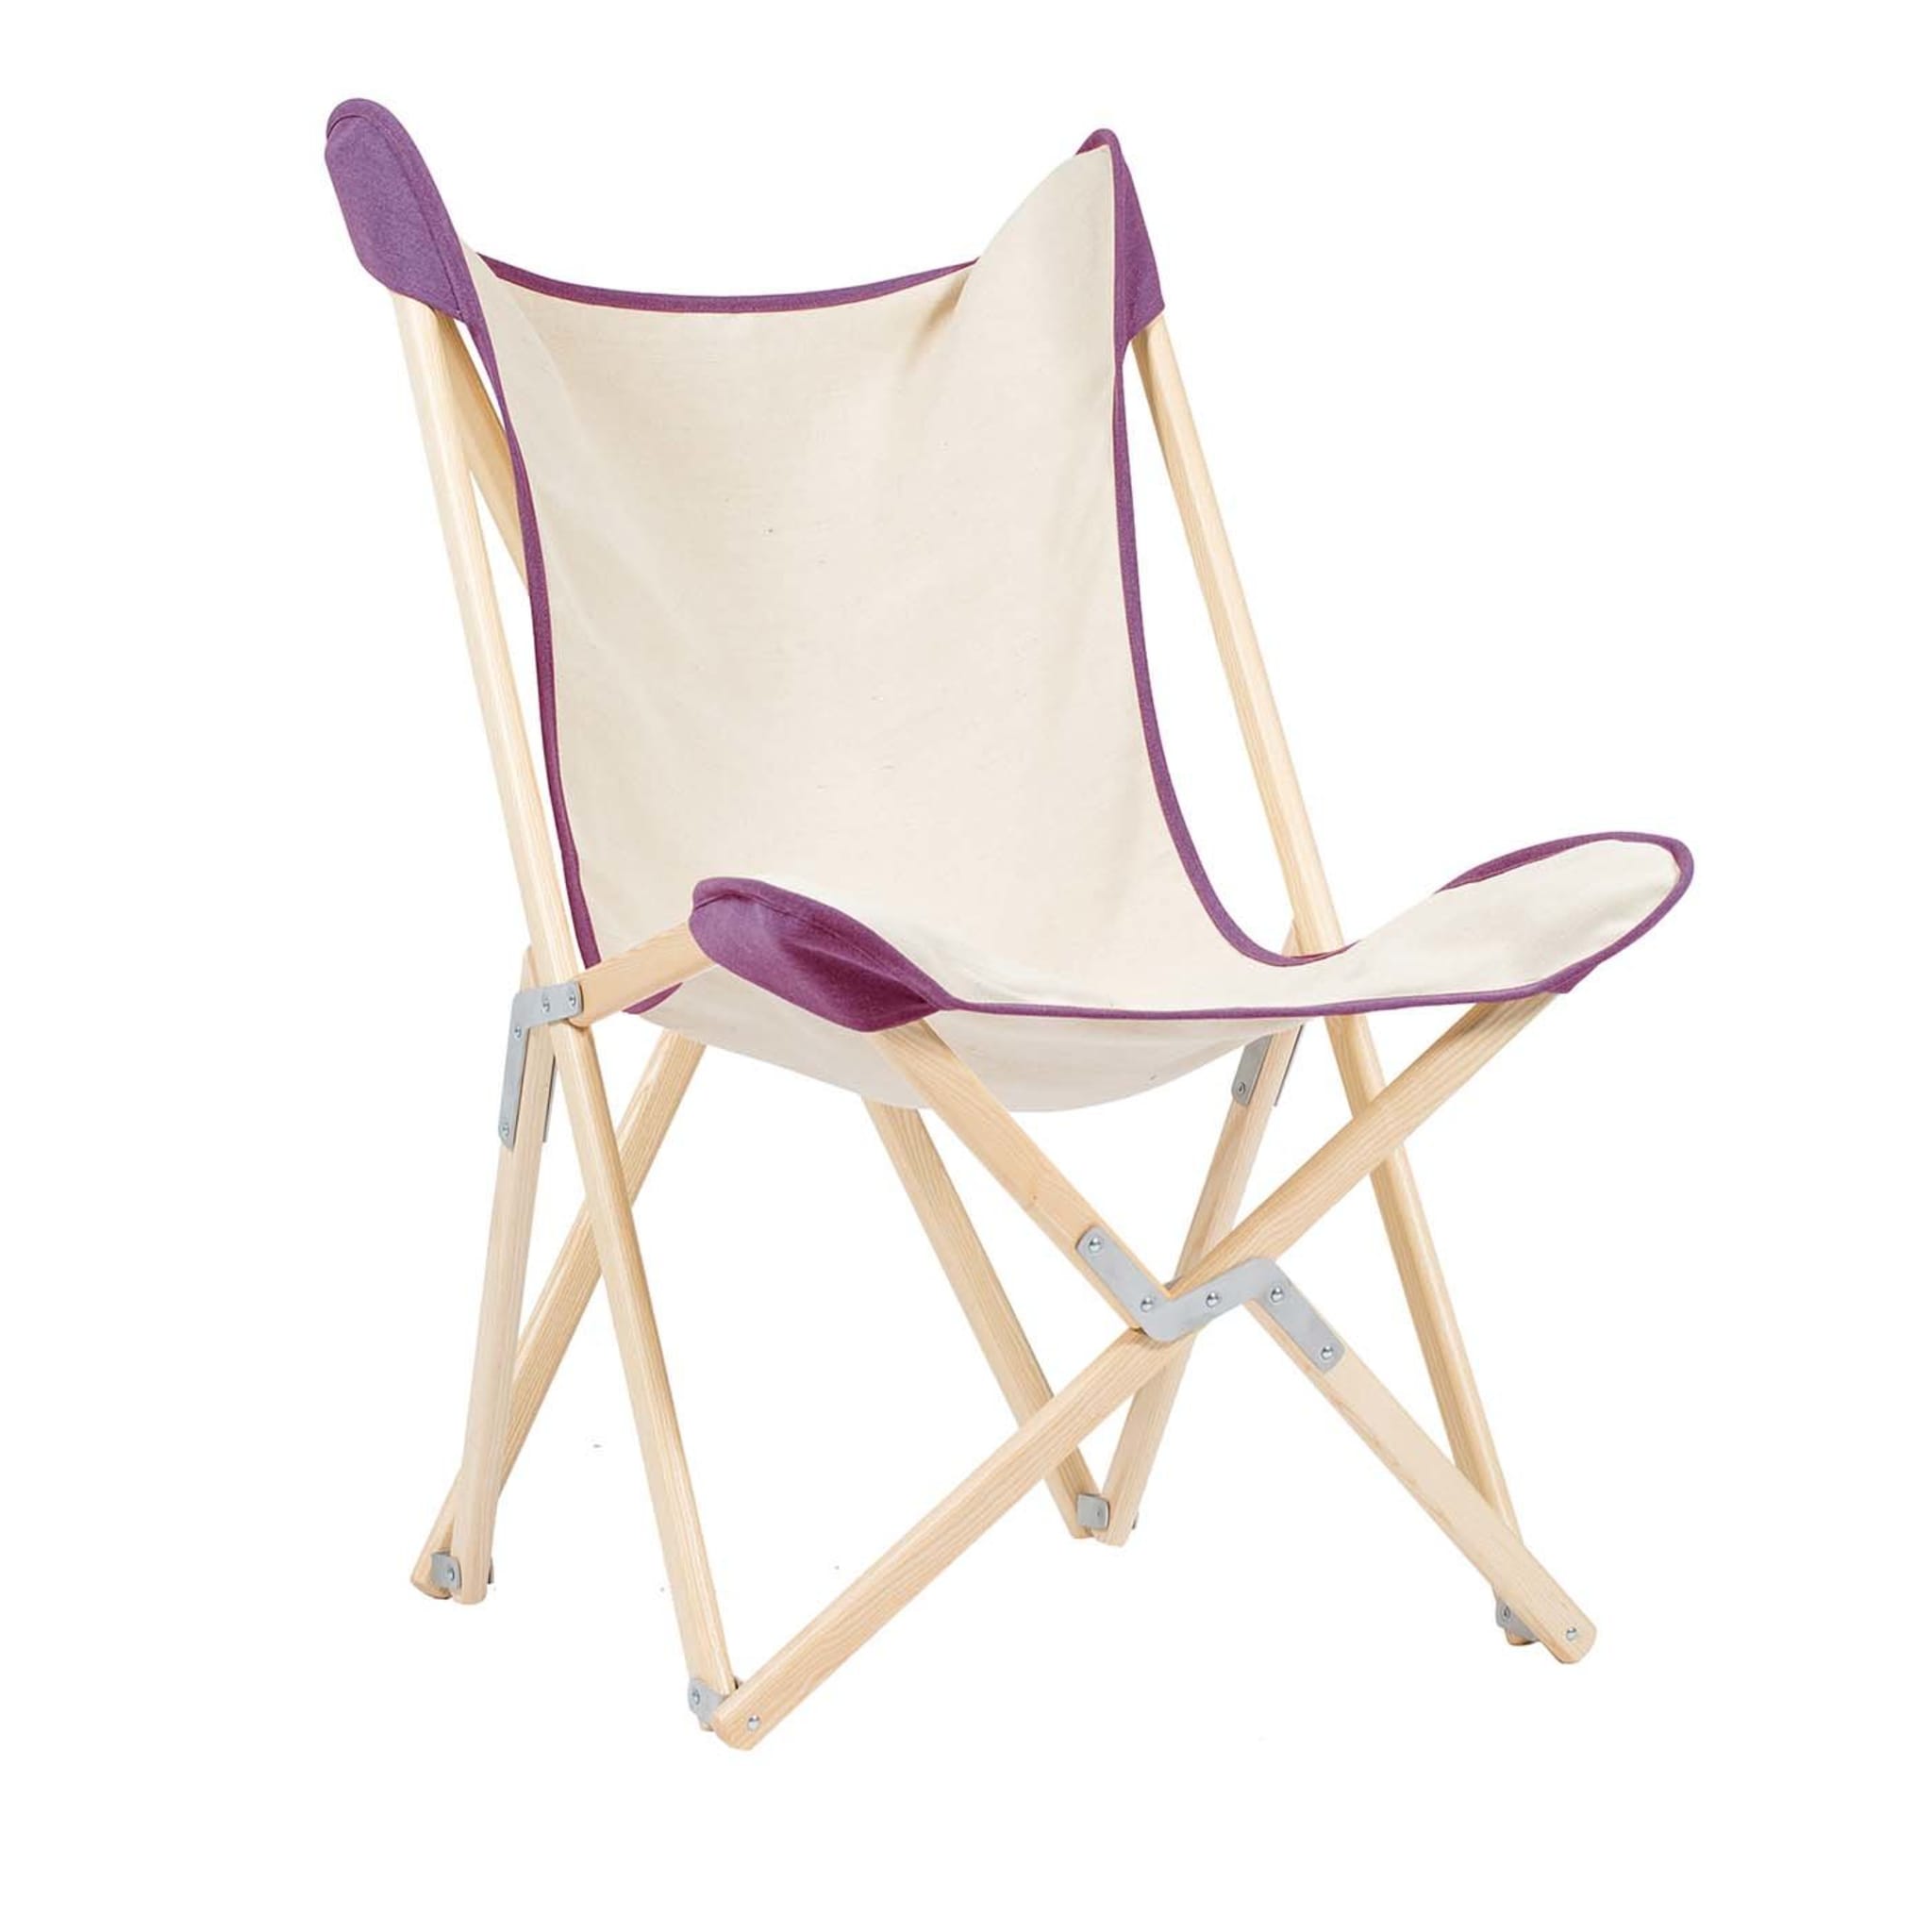 Tripolina Armchair in Cream and Purple - Main view